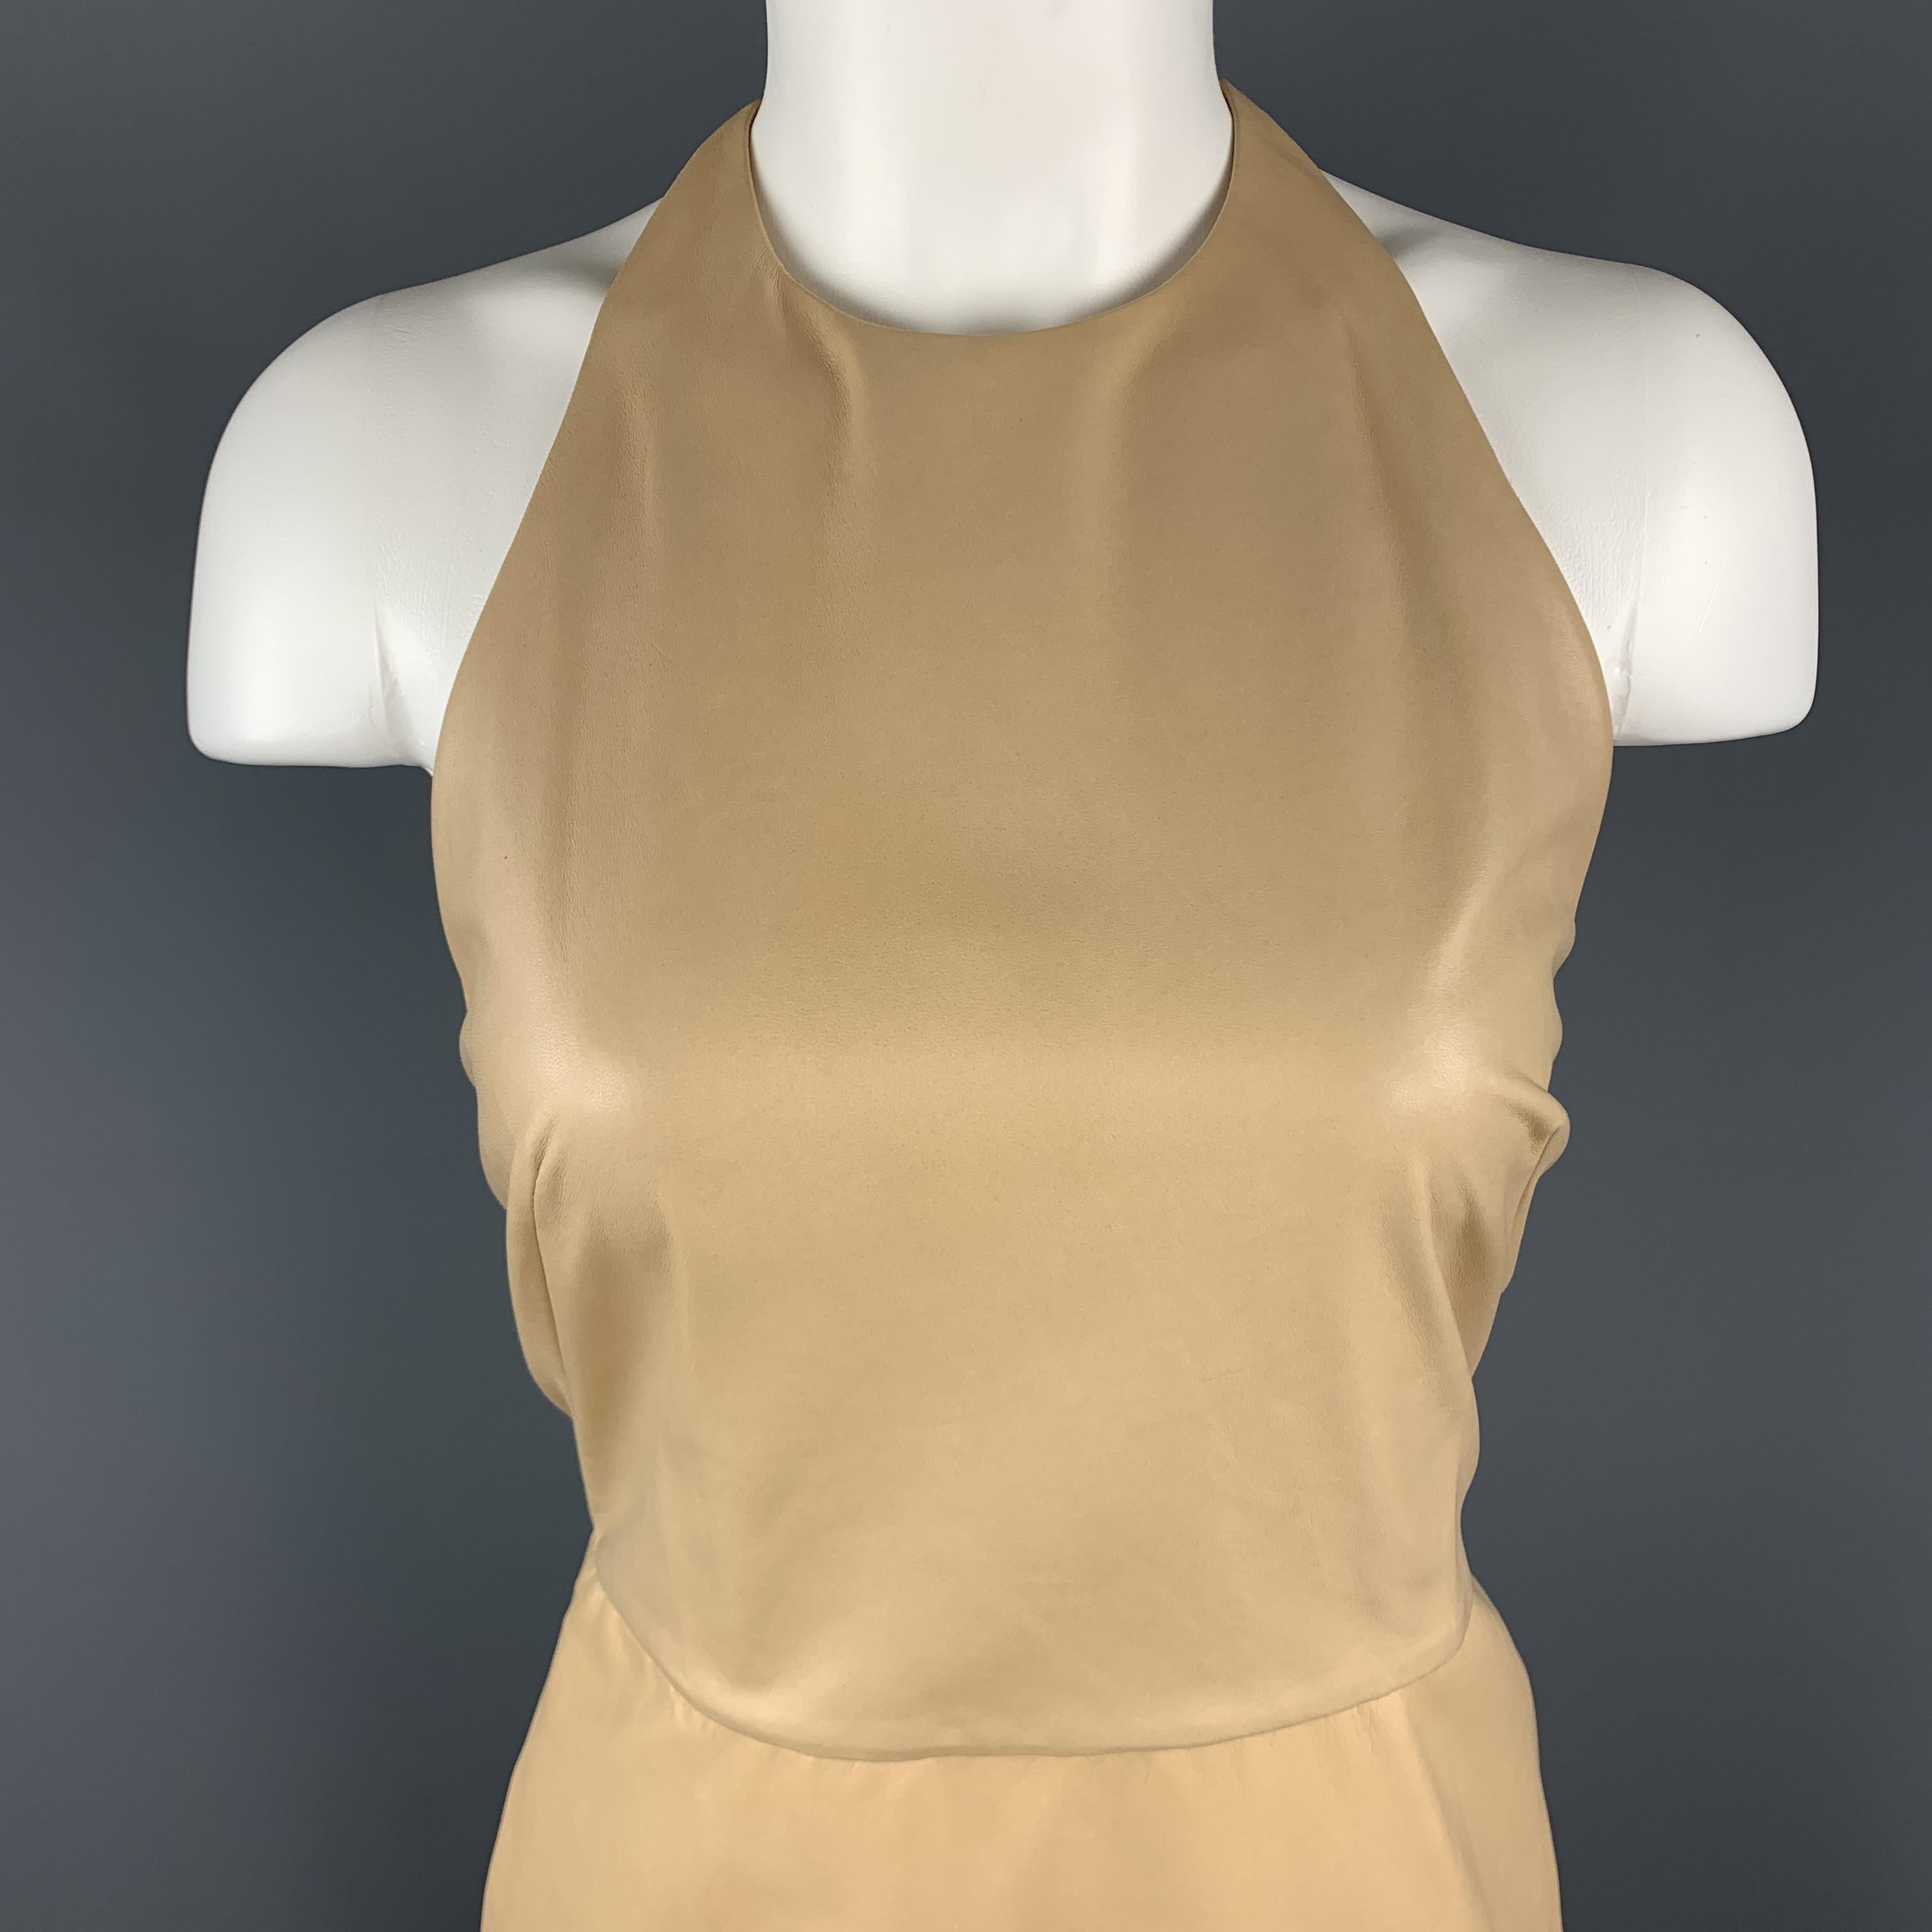 PHILLIP LIM dress comes in beige lamb skin leather with a halter neckline and slit silk chiffon back panel. 

New With Tags. 
Marked:  4

Measurements:

Shoulder: 7.5 in.
Bust: 32 in.
Waist: 28 in.
Hip: 39 in.
Length: 34 in.